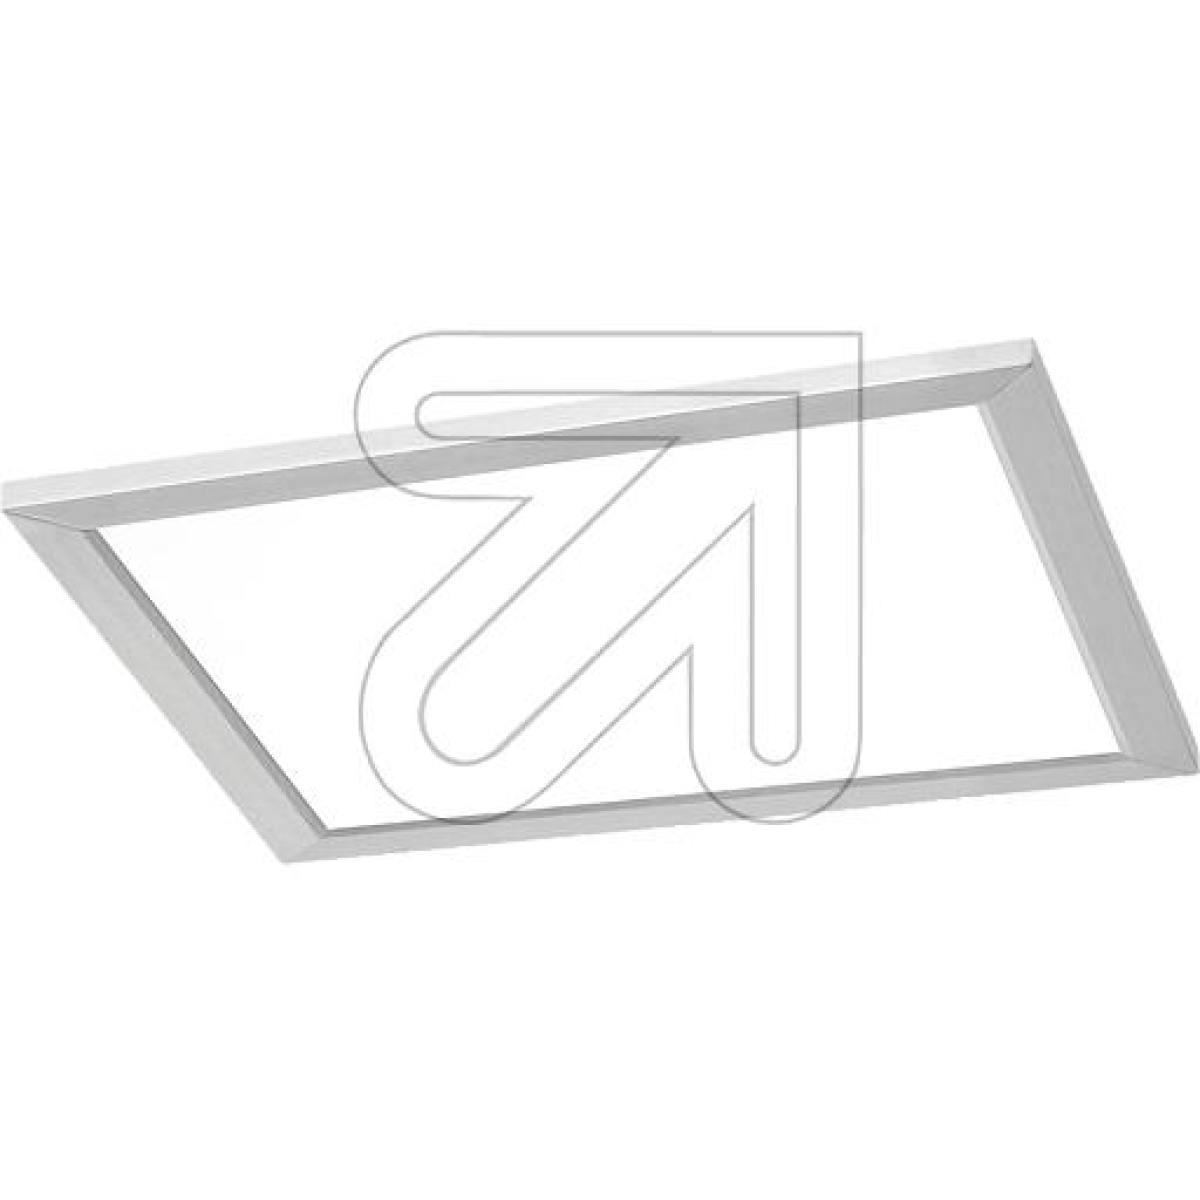 TRIOLED surface-mounted light 300x300mm 12W 3000K, nickel matt dimmable, 674013007Article-No: 681565